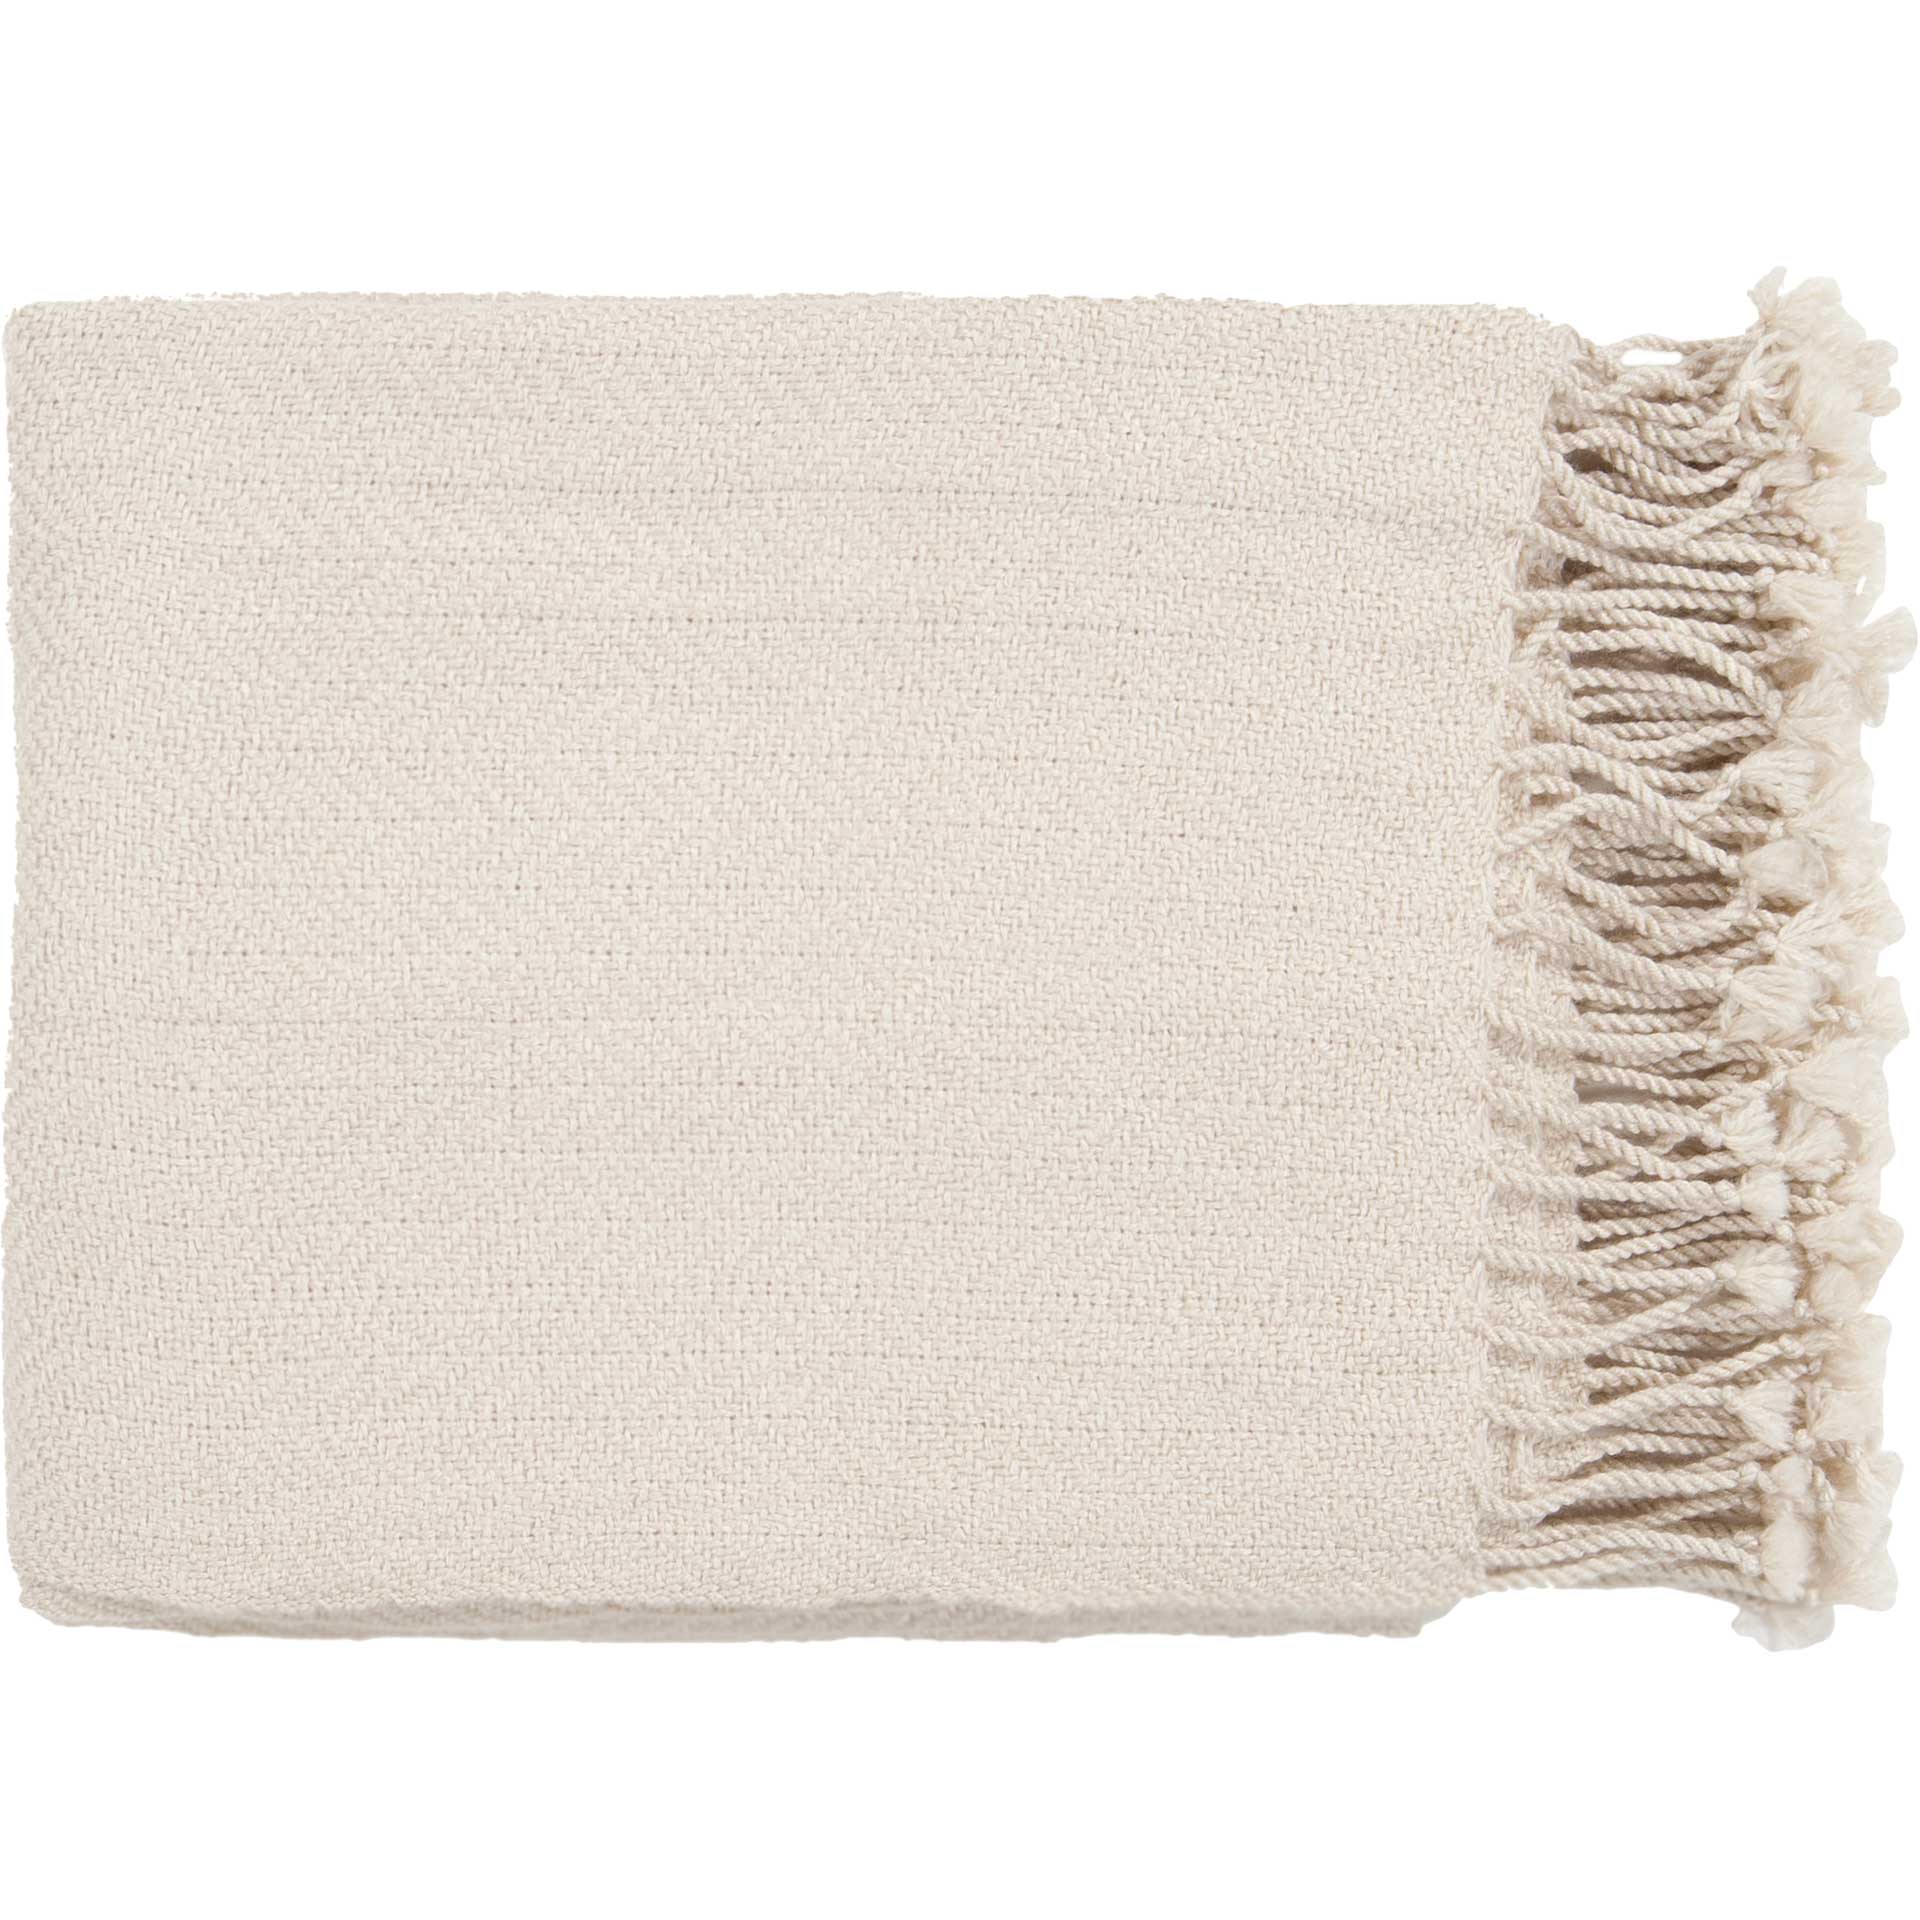 Turner Solid Neutral Throw